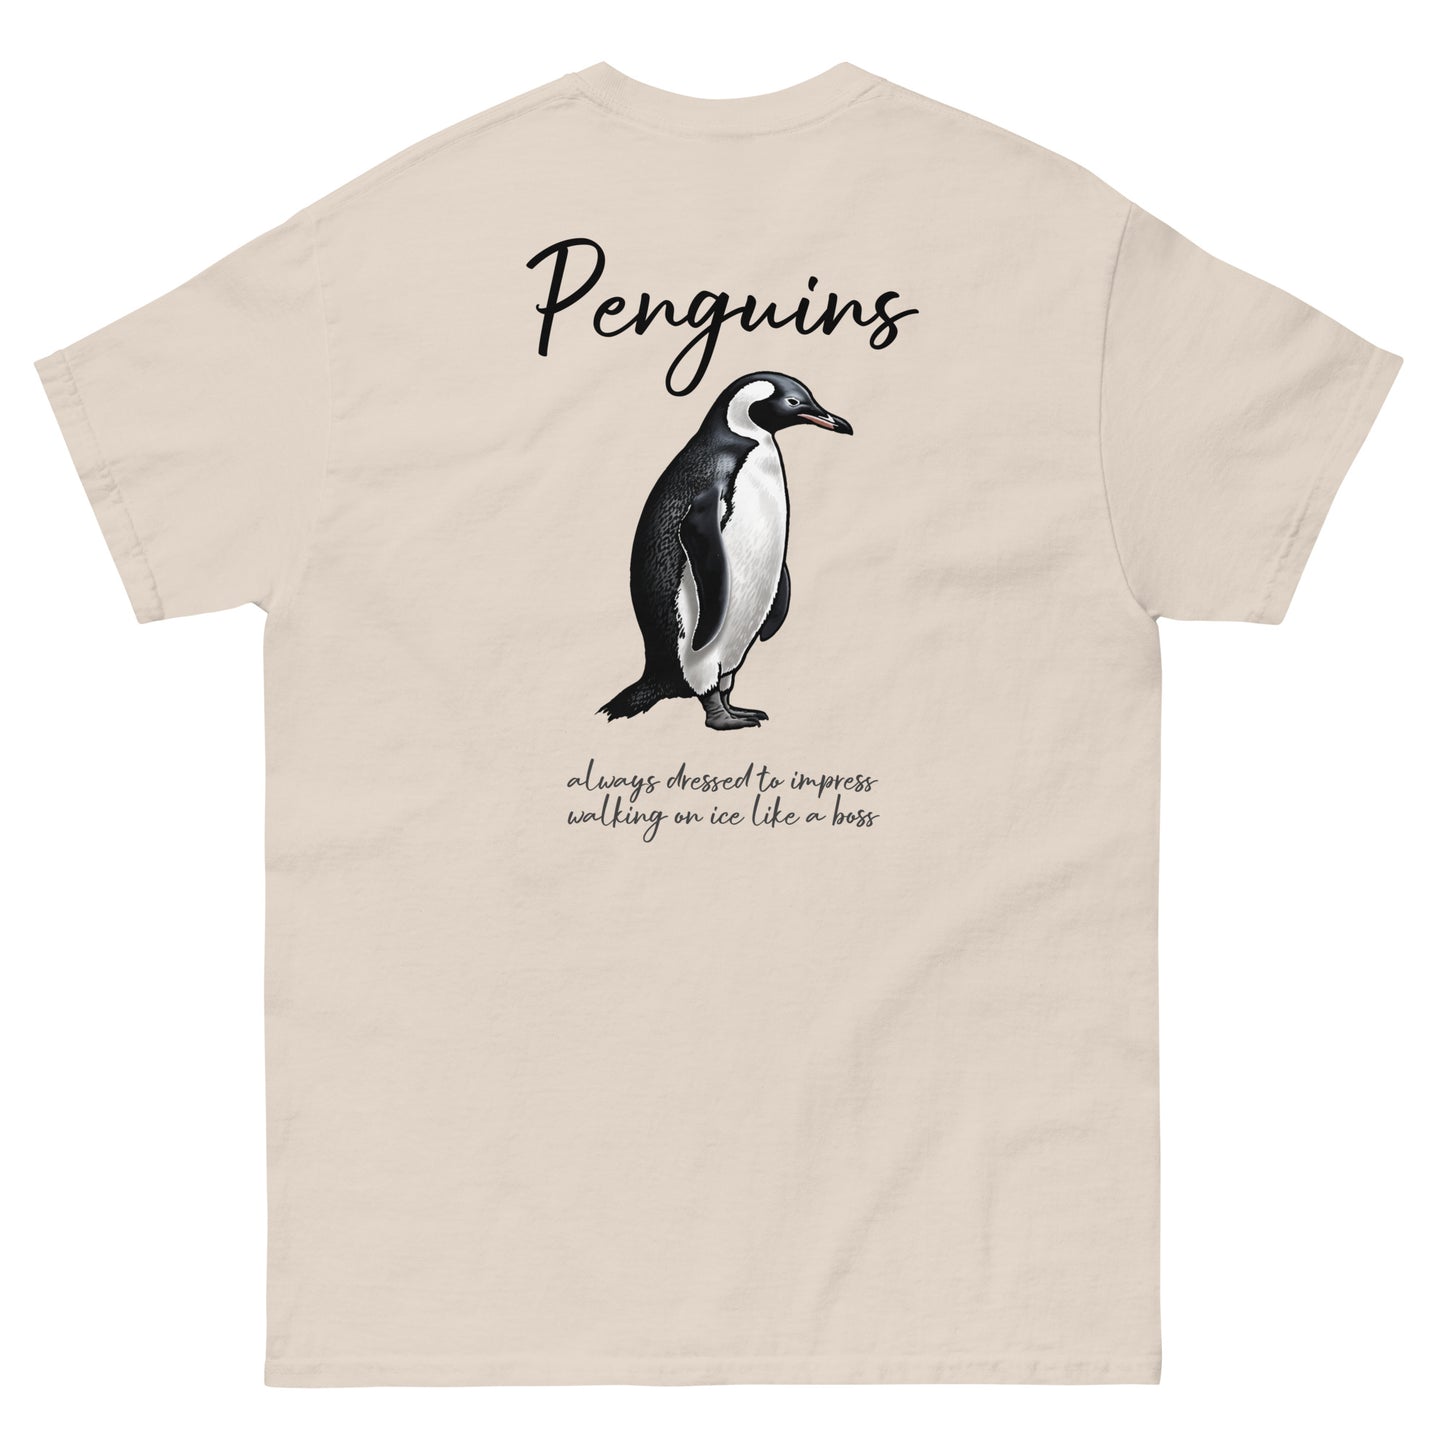 Ivory High Quality Tee - Front Design with a Penguin on left chest - Back Design with a Penguin and a Phrase "Penguins:always dressed to impress, walking on ice like a boss" print